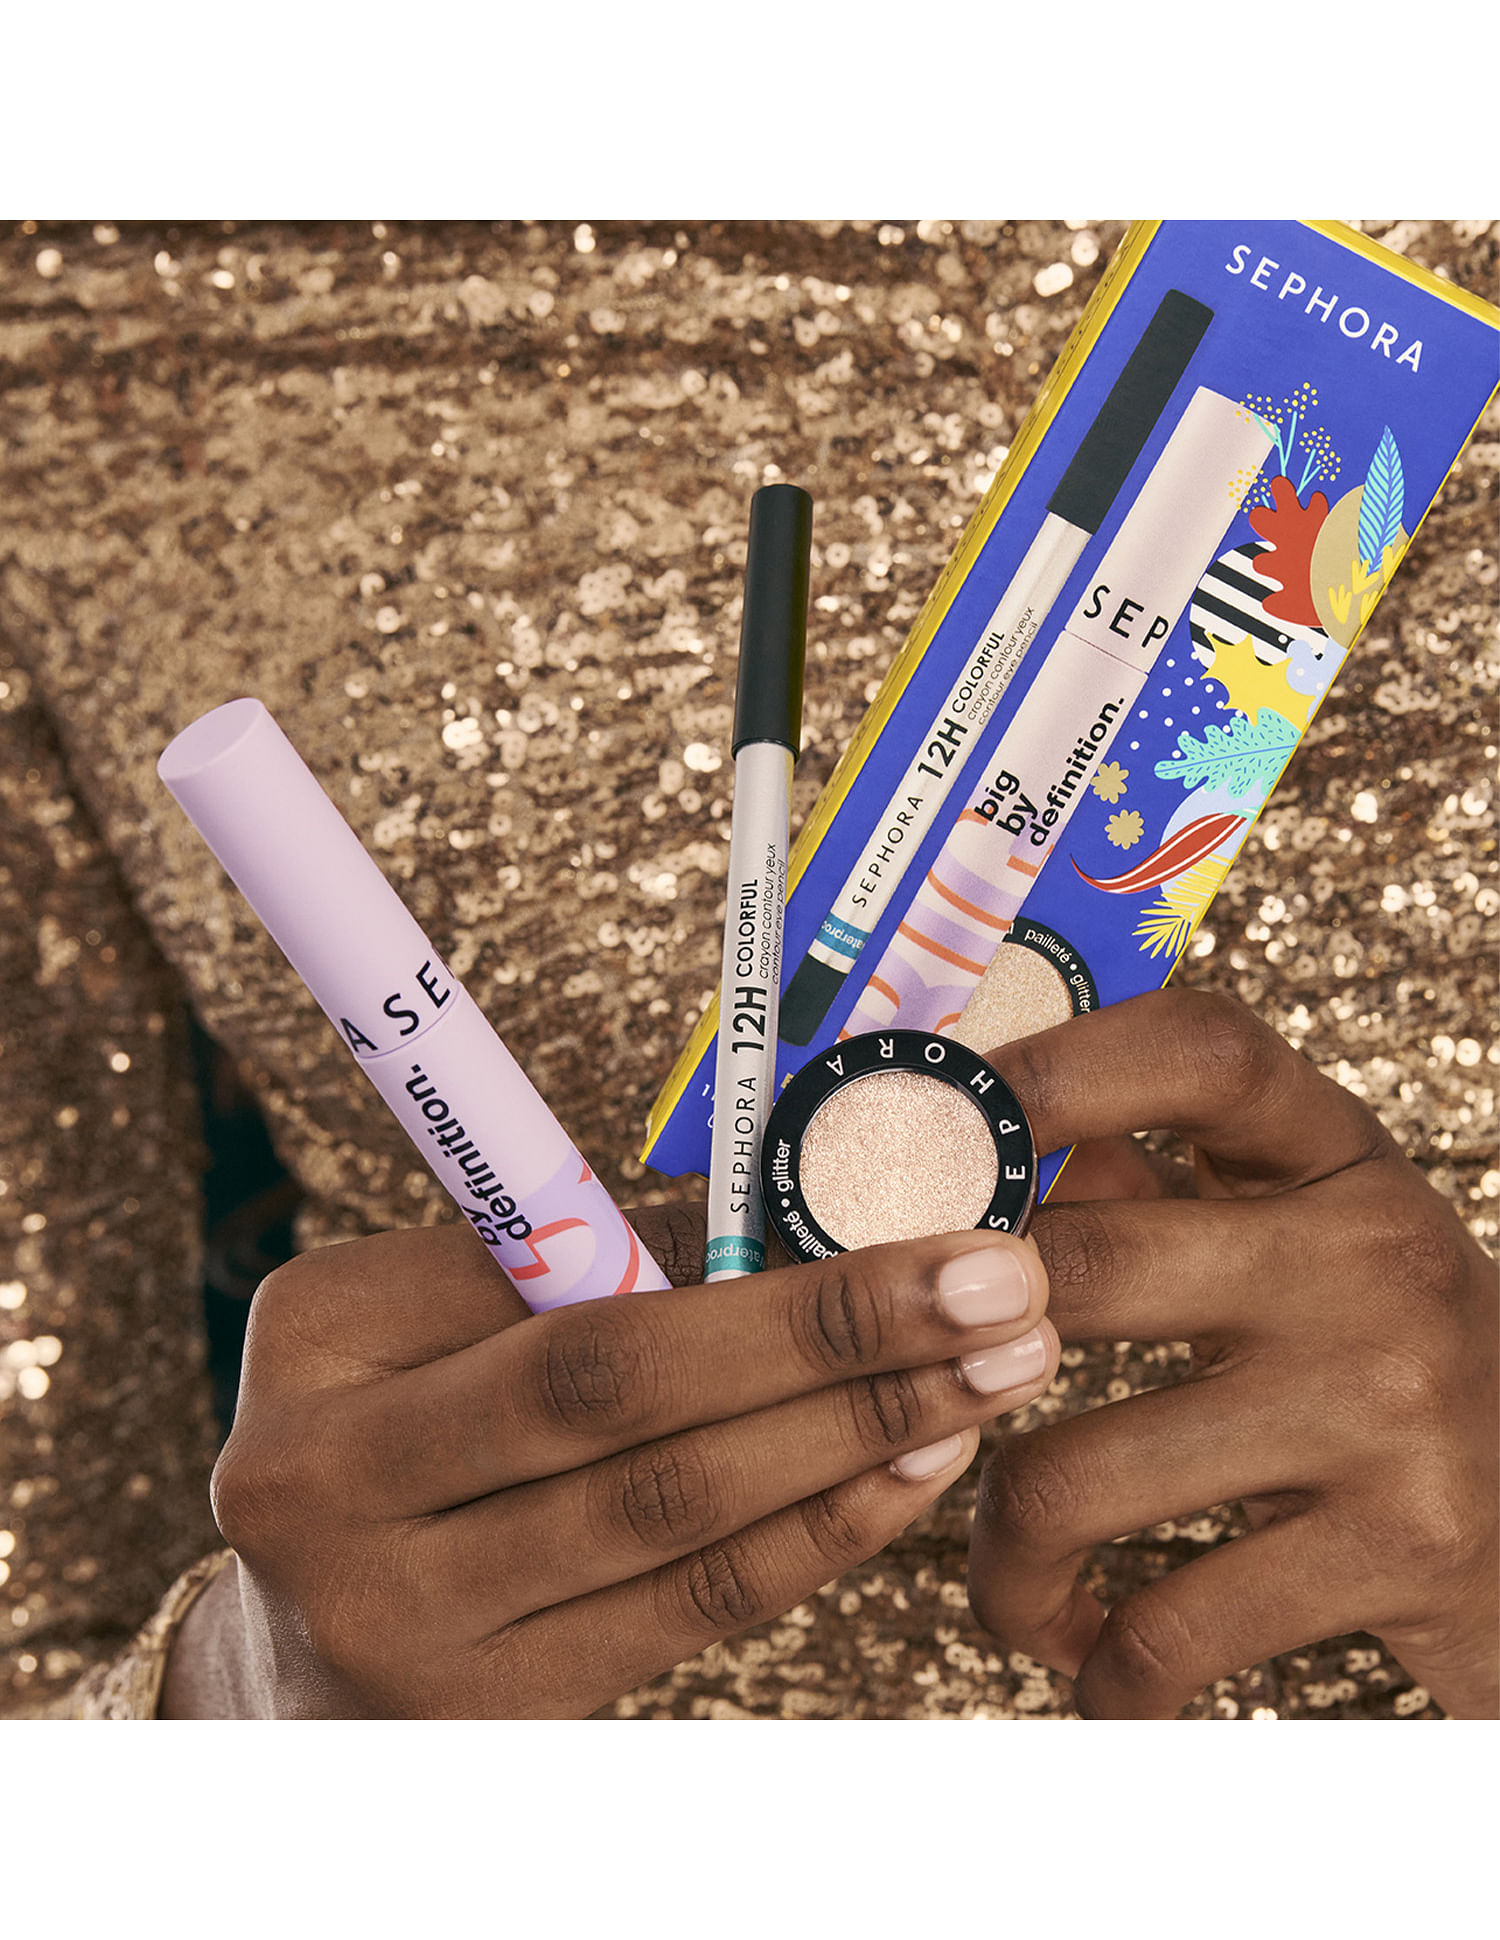 Sephora is selling ColourPop collection in stores, online